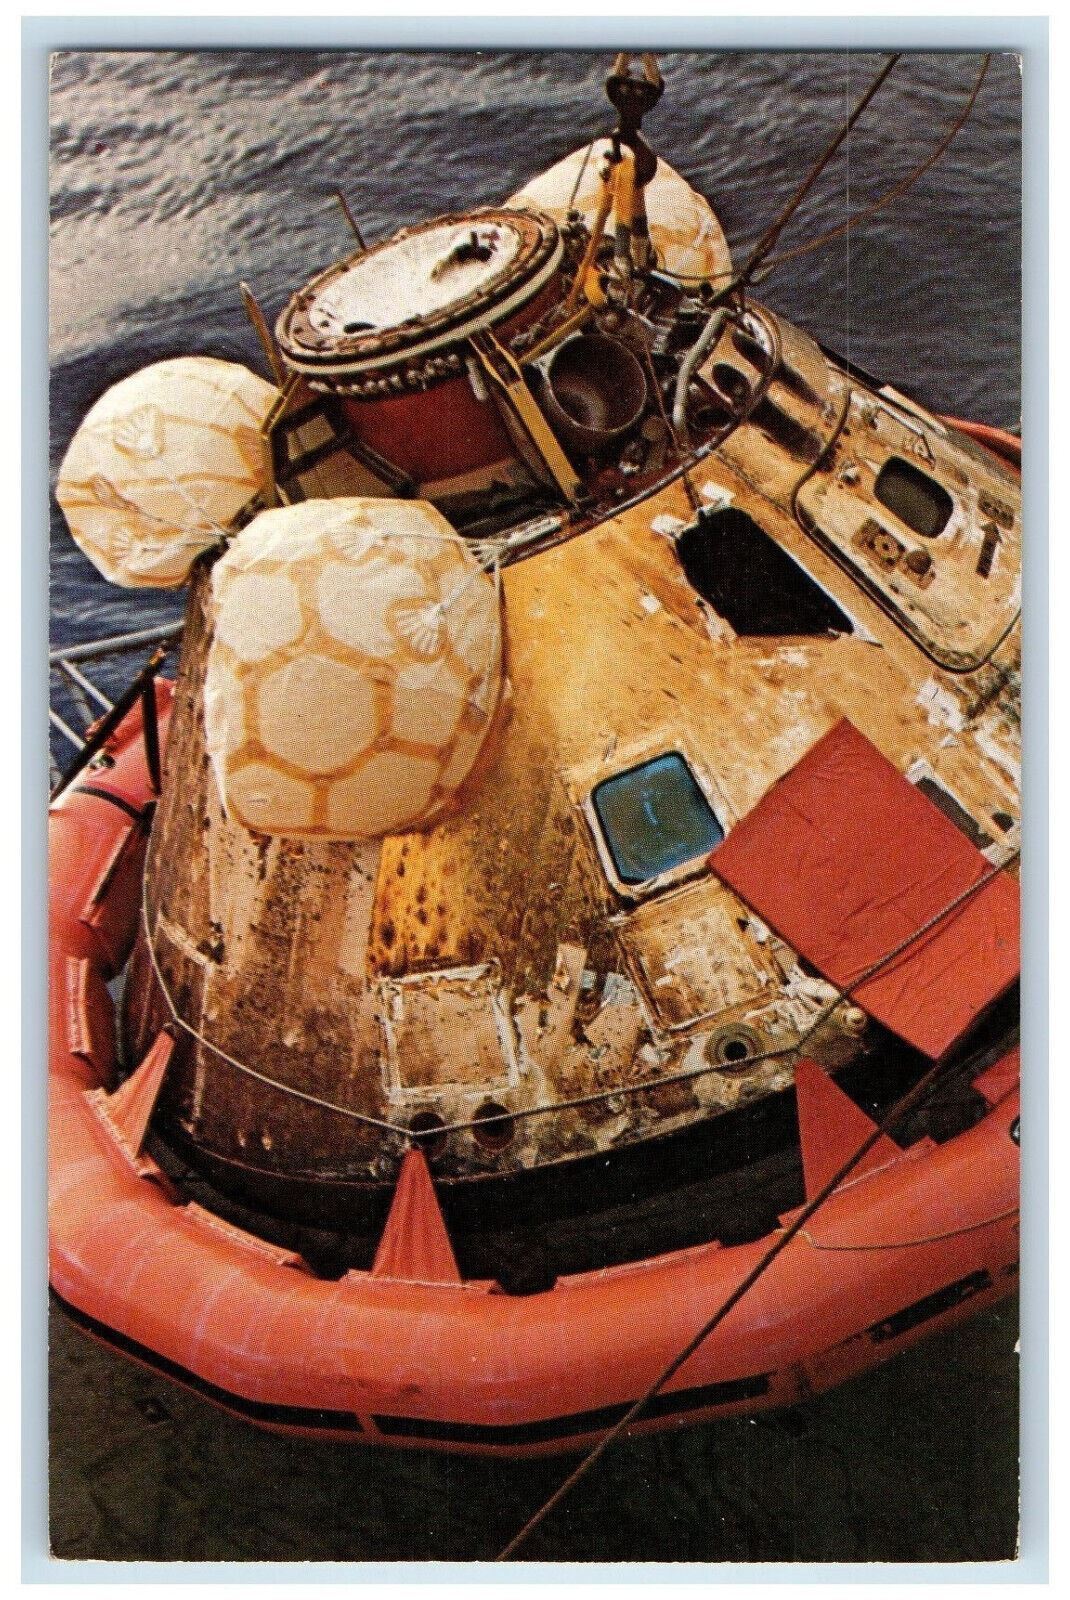 c1950s Recovery Area Pacific Ocean, Apollo 8 Spacecraft Recovery Postcard